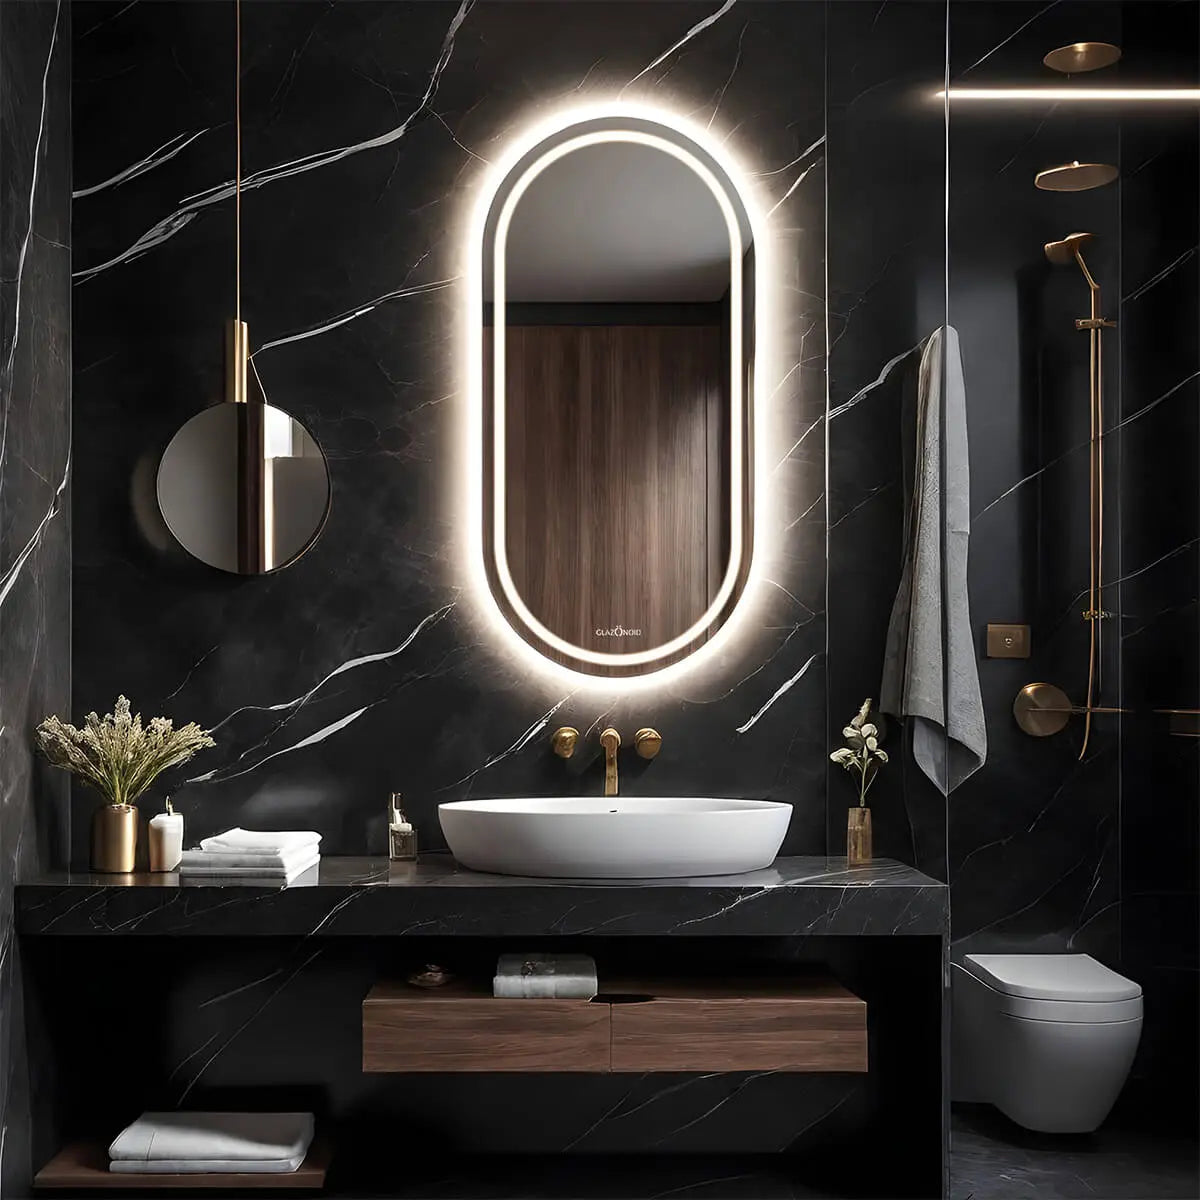 A modern bathroom vanity with a black finish, polished chrome sink and a capsule shaped LED mirror with a dimmable LED light behind it. The mirror is mounted on the wall above the sink.